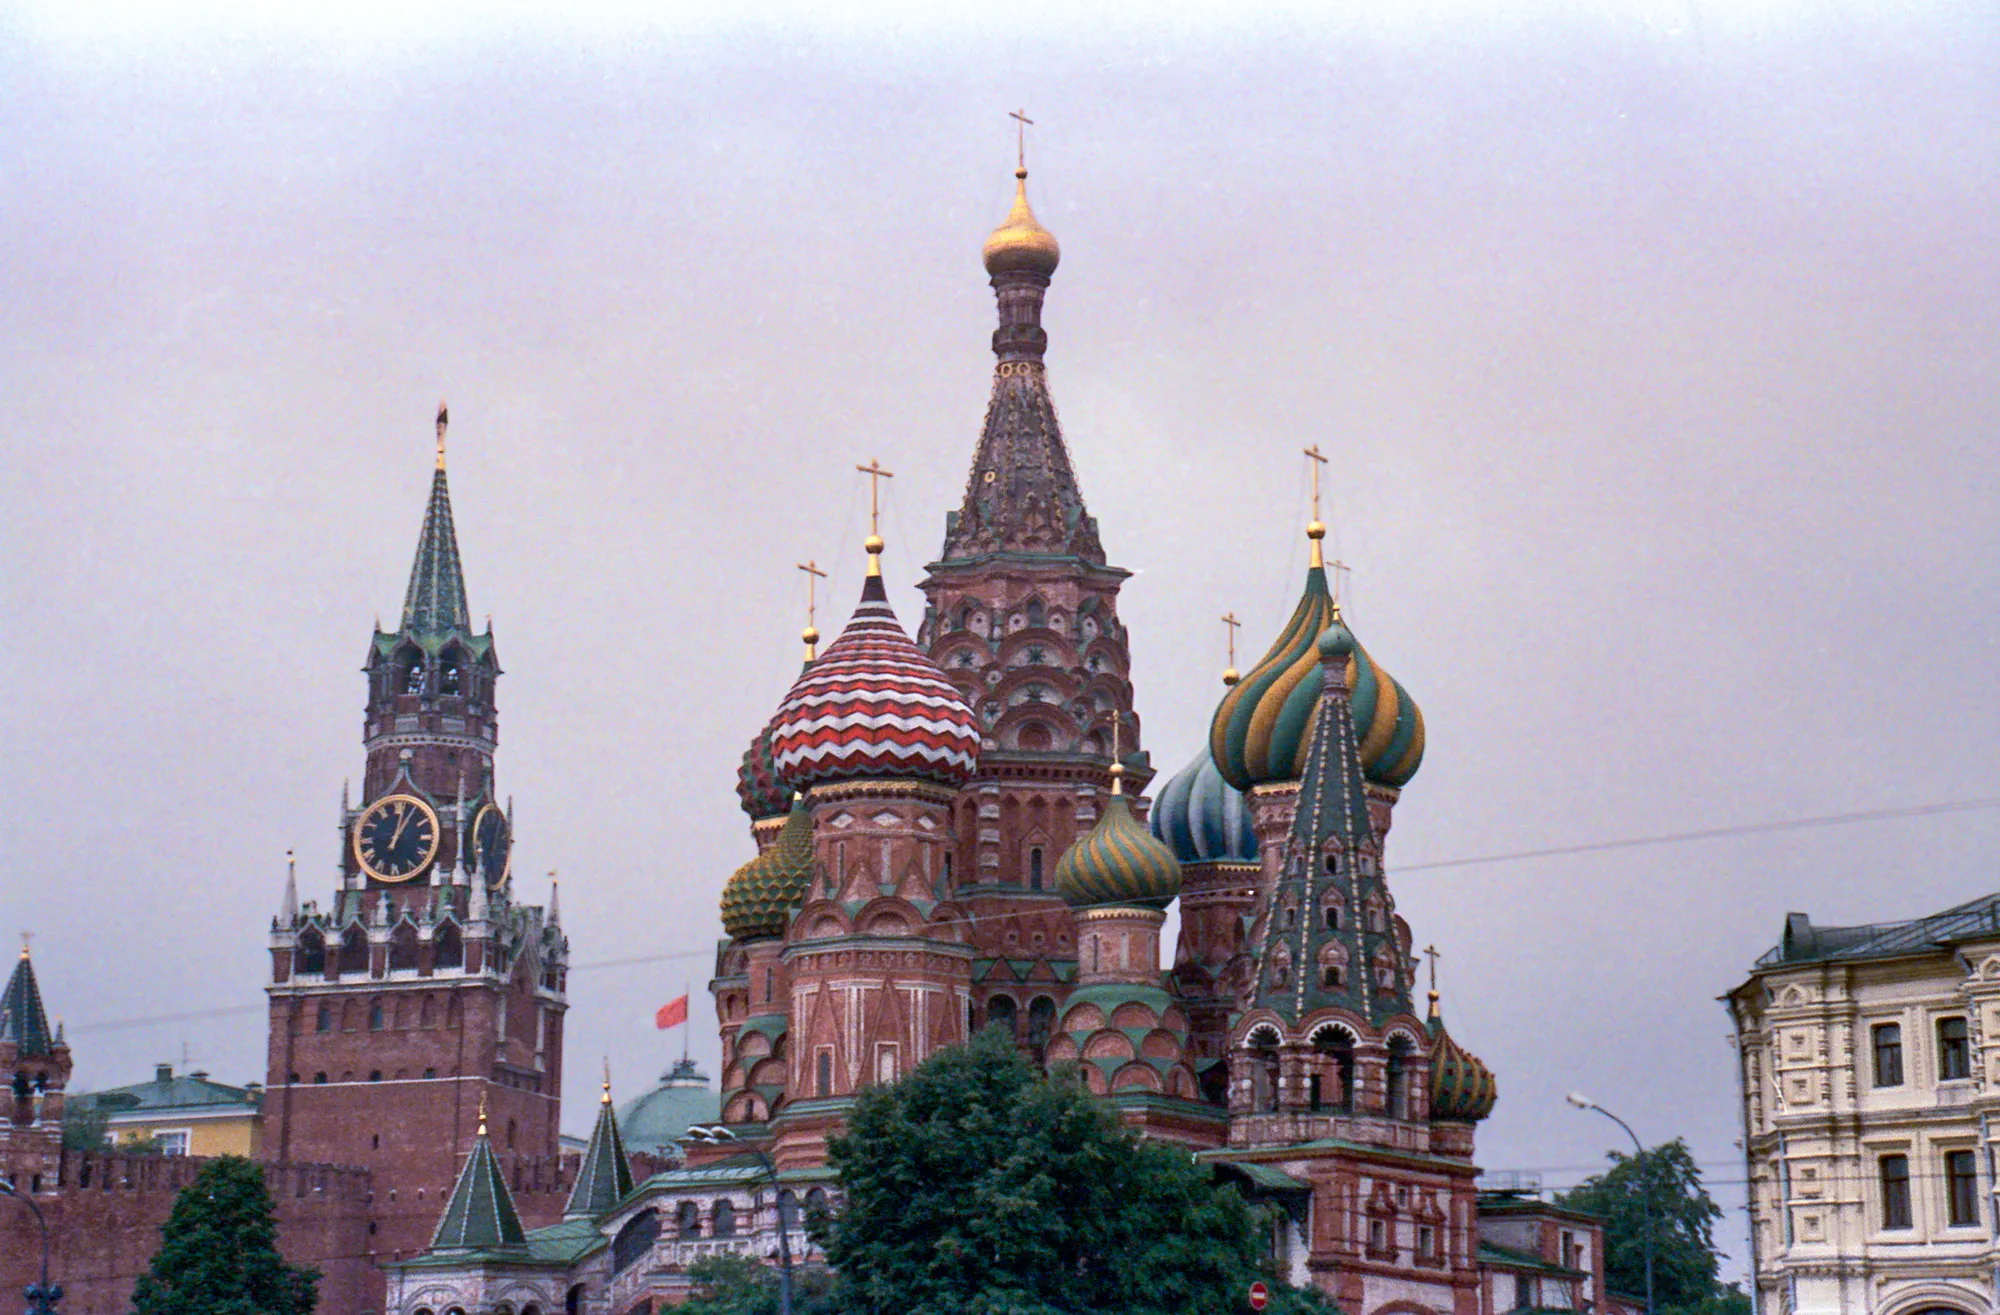 The Spires of St. Basil's